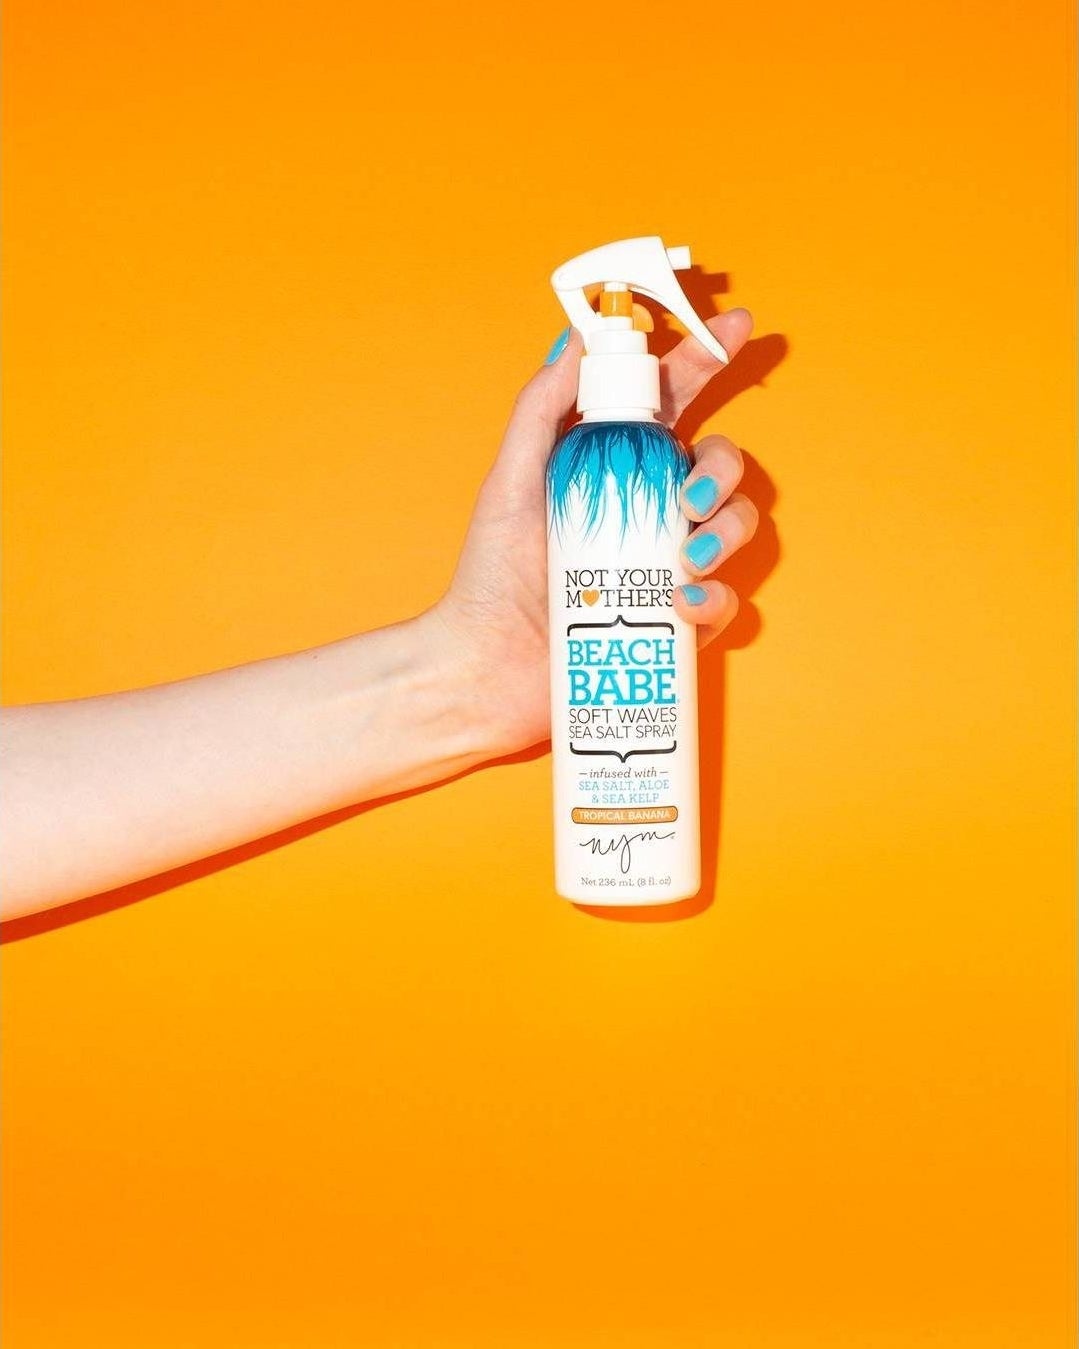 A hand holding up a spray bottle of the product